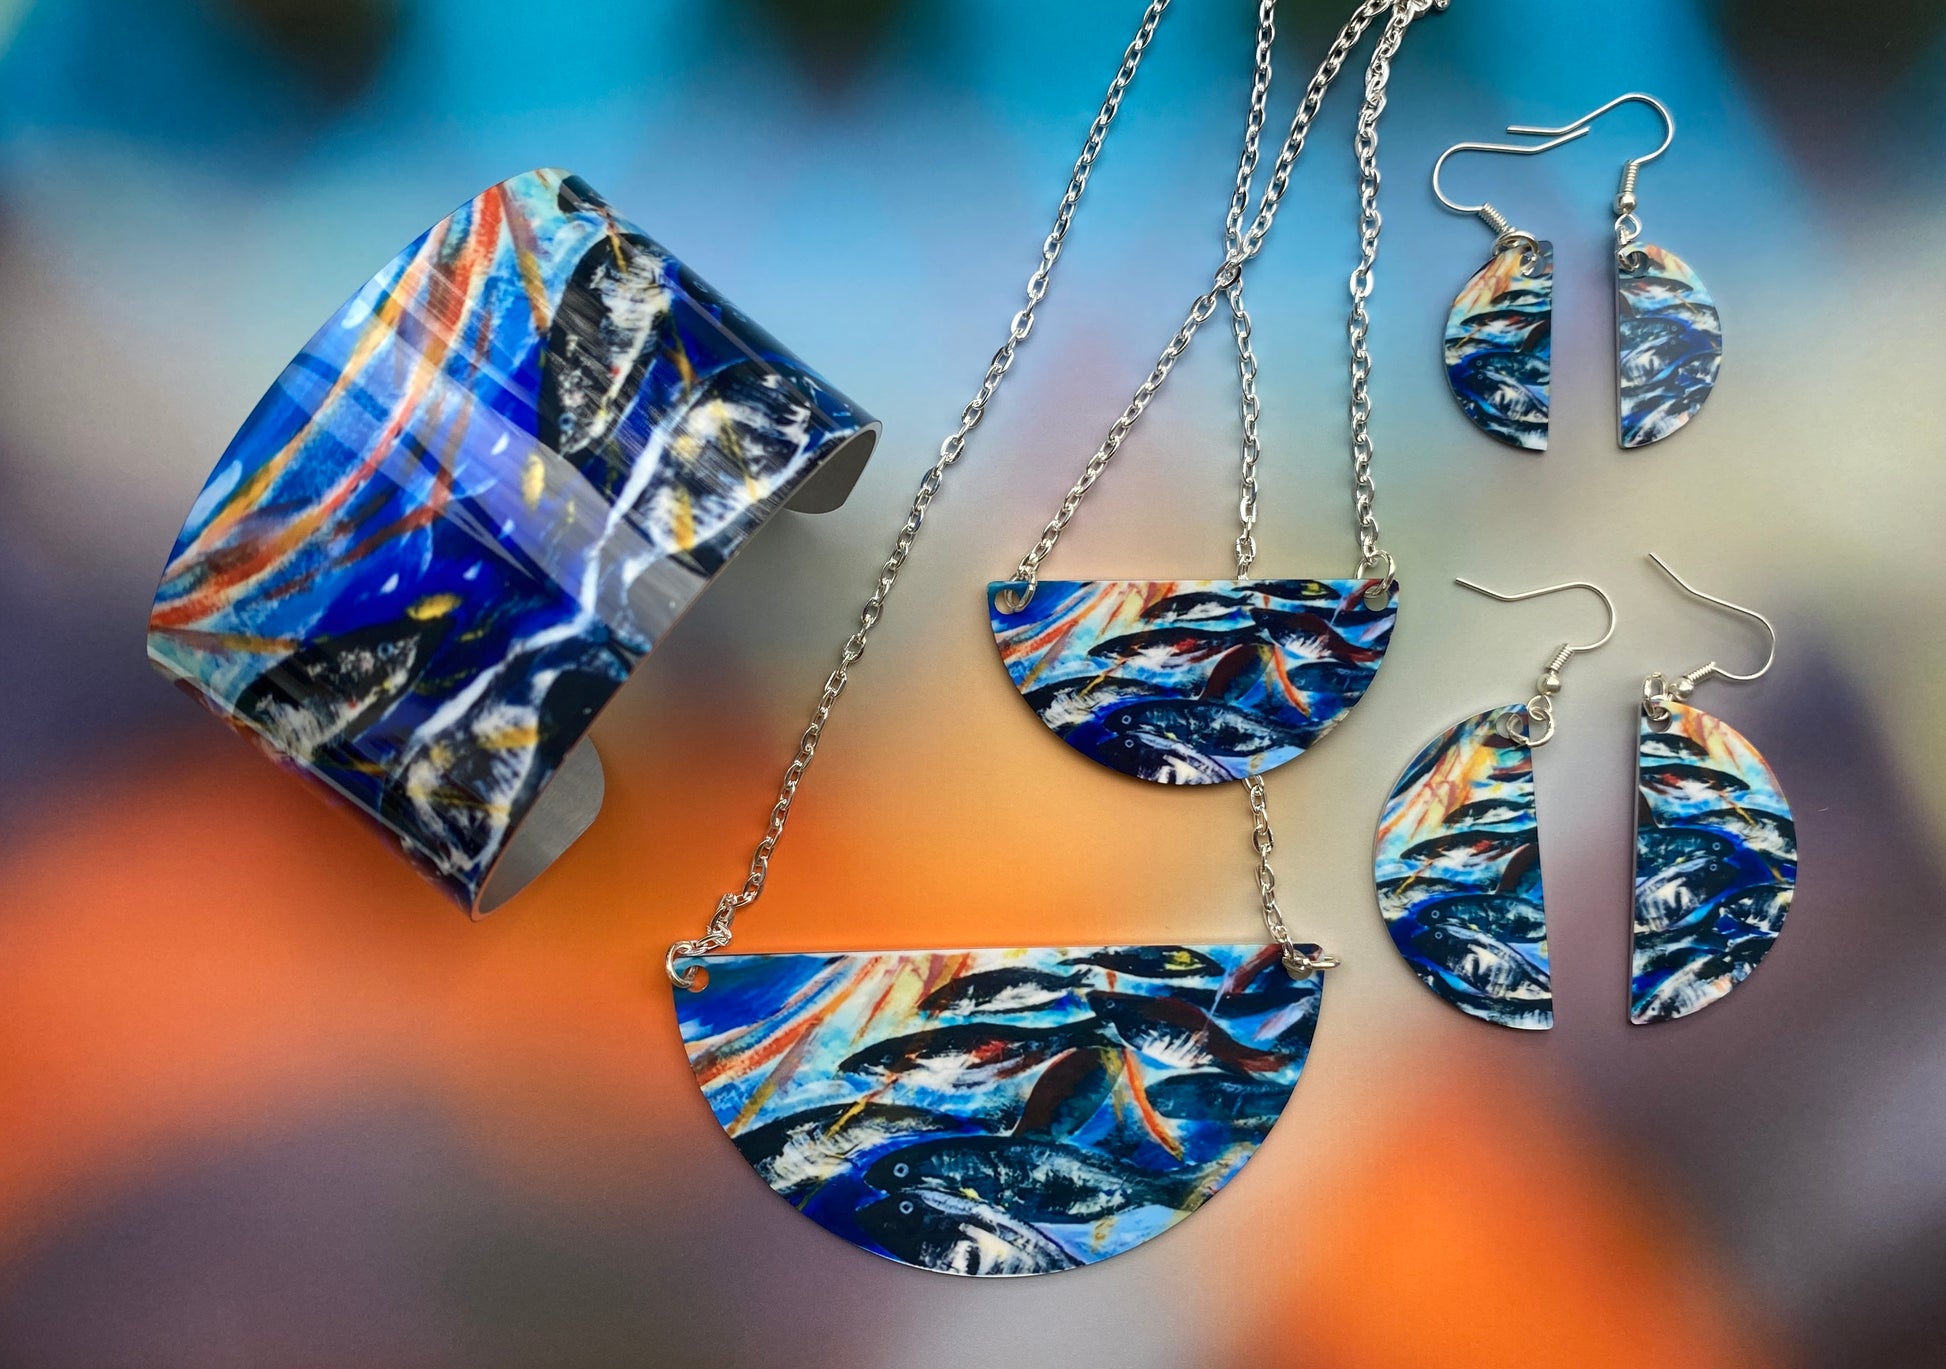 A set of jewellery  with Silver darlings design by Orkney artist Jane Glue, Scotland